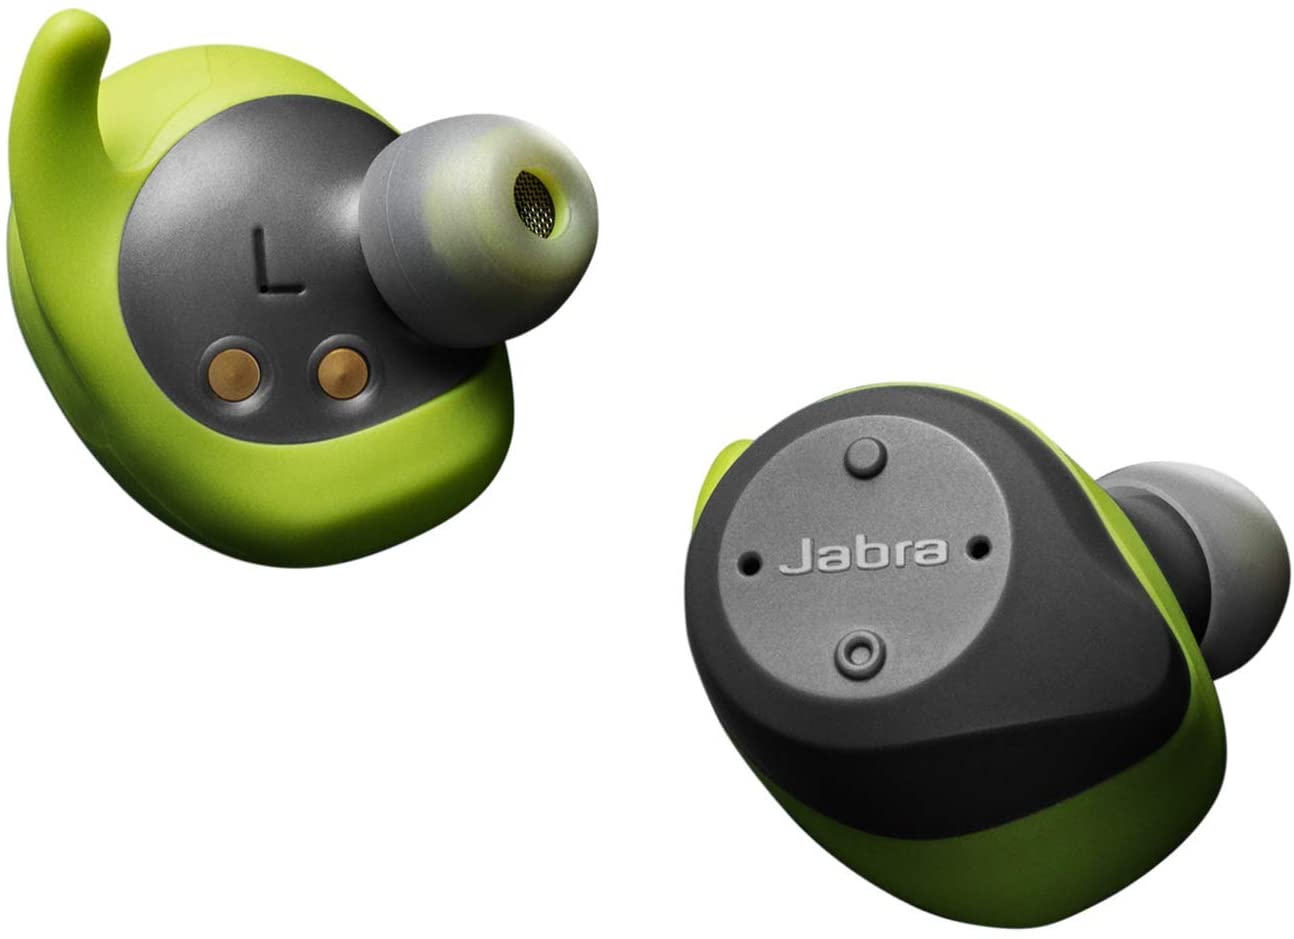 Jabra Elite Sport Water Proof True Wireless with Heart Rate & Activity Tracker Earbuds - Lime Green